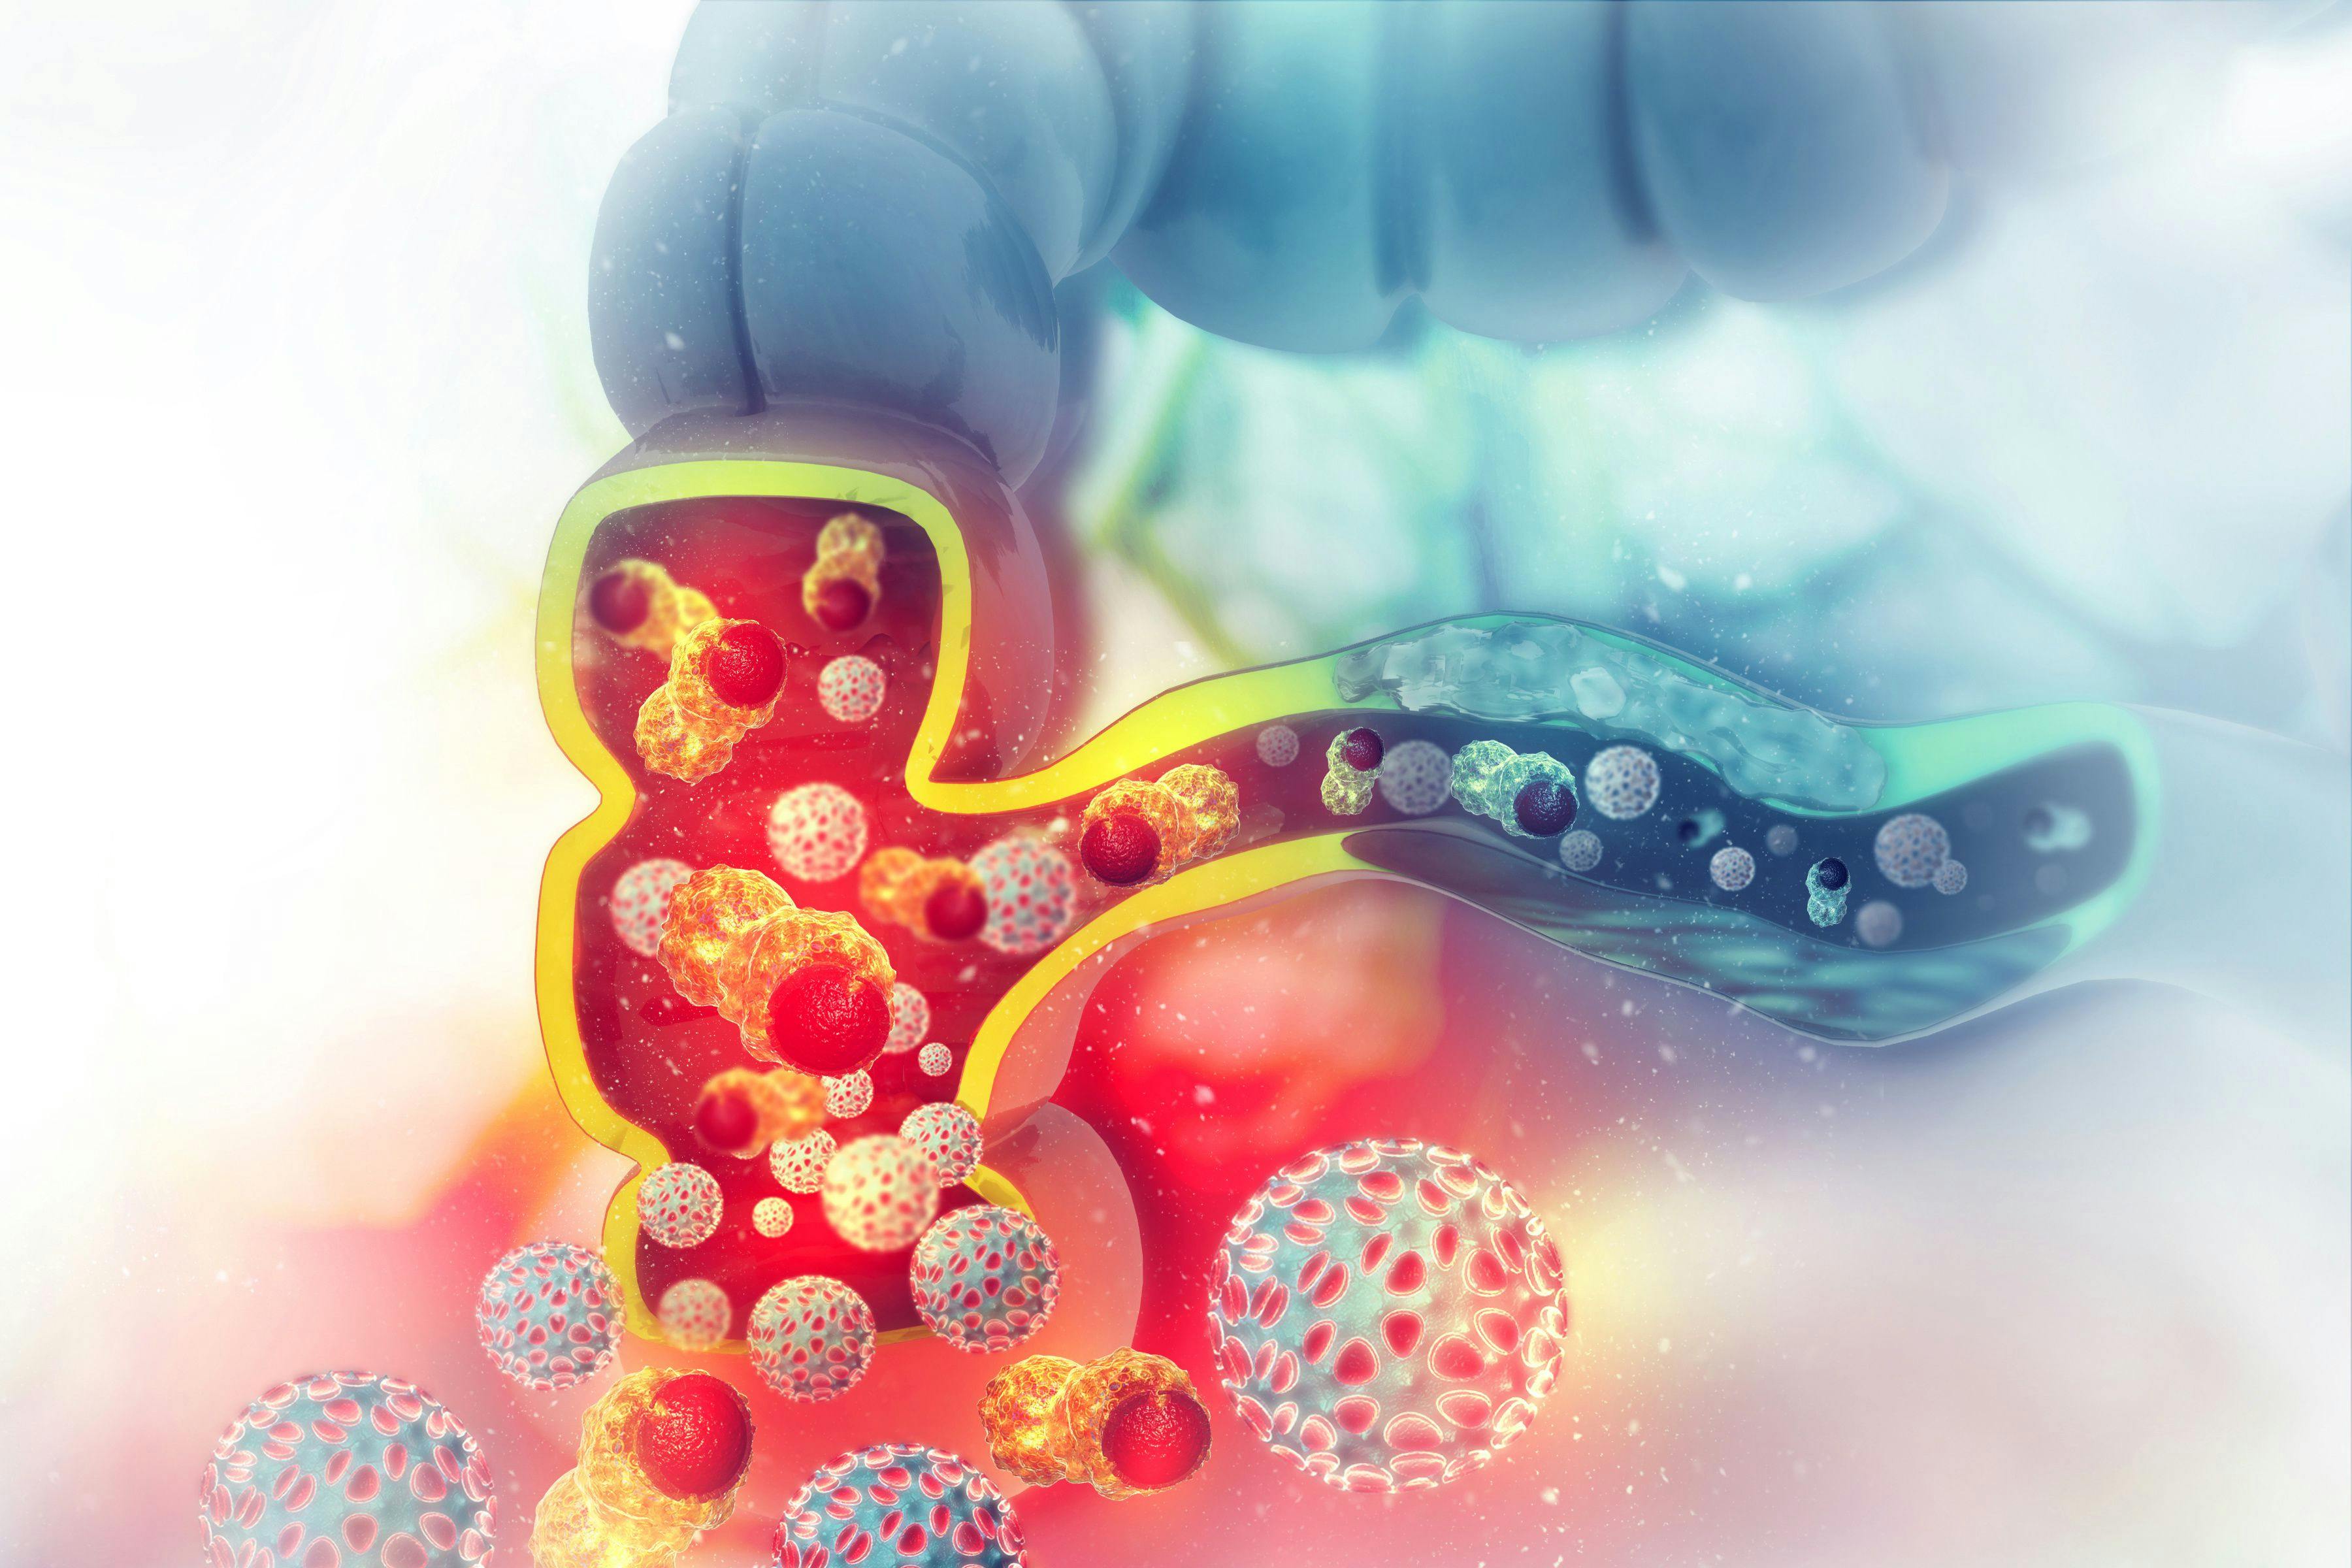 Colon cancer. Cancer attacking cell. Colon disease concept. 3d illustration | Image Credit: © Crystal light - www.stock.adobe.com